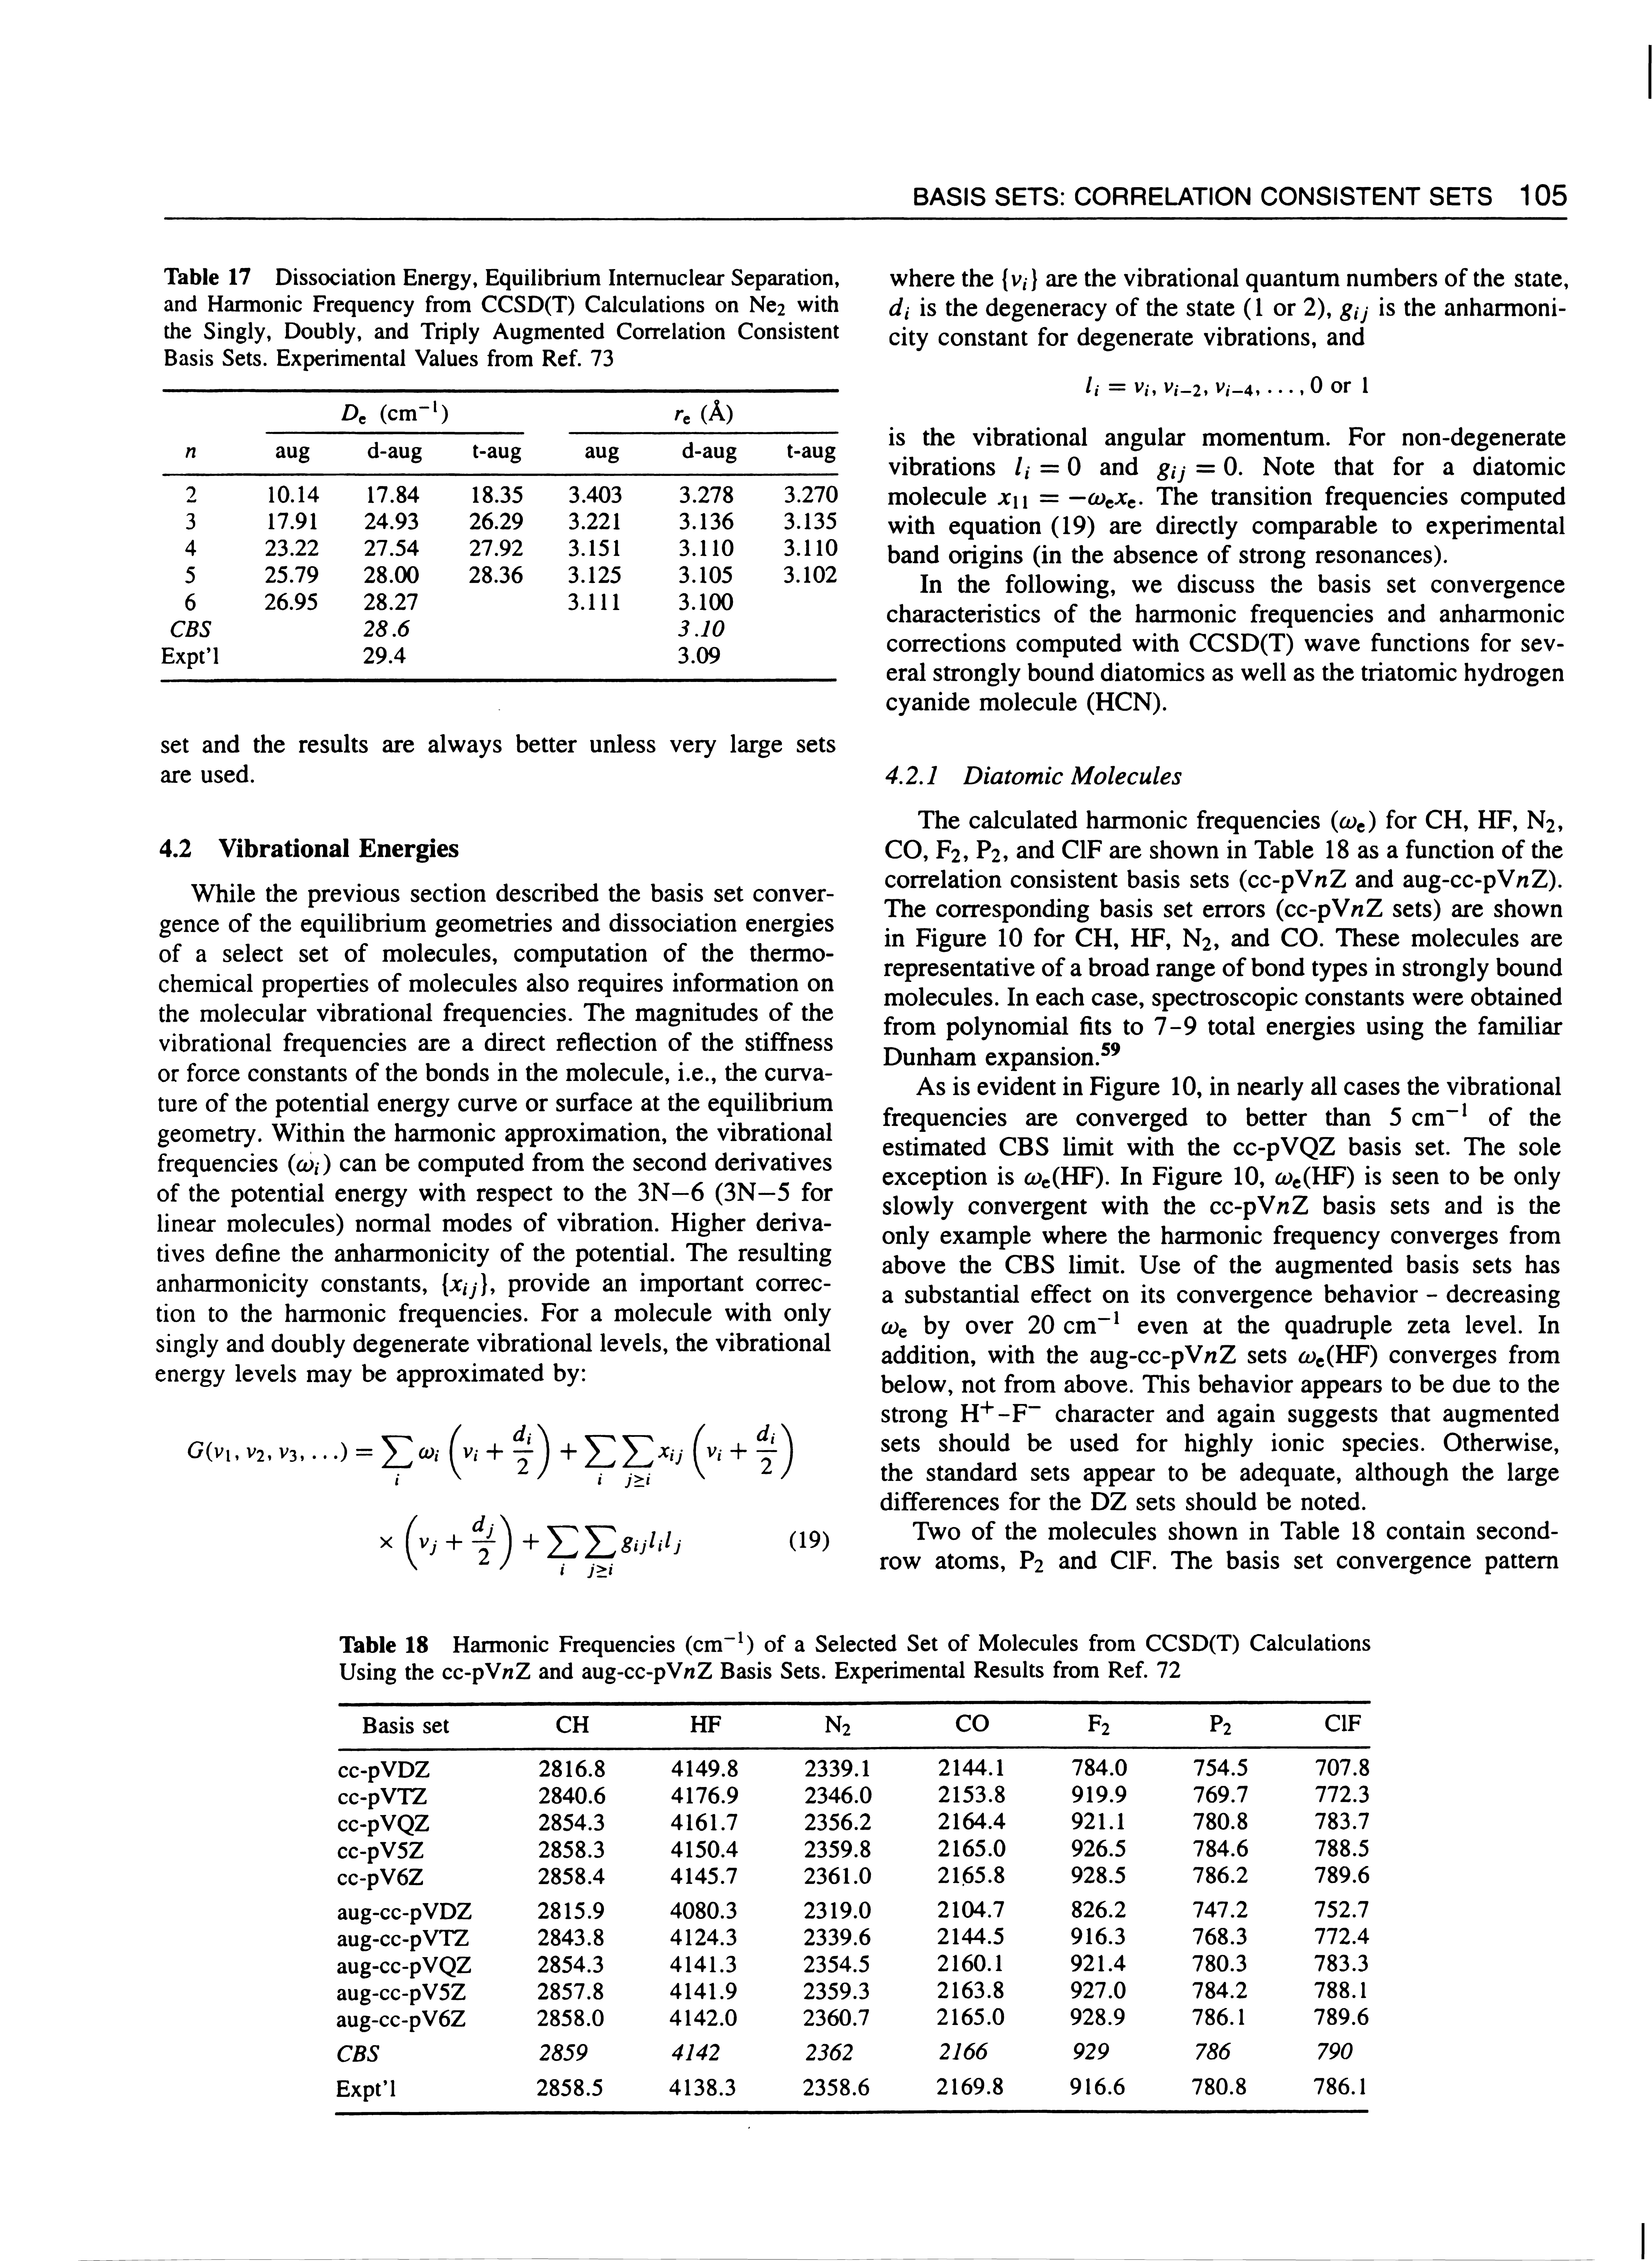 Table 17 Dissociation Energy, Equilibrium Intemuclear Separation, and Harmonic Frequency from CCSD(T) Calculations on Ne2 with the Singly, Doubly, and Triply Augmented Correlation Consistent Basis Sets. Experimental Values from Ref. 73...